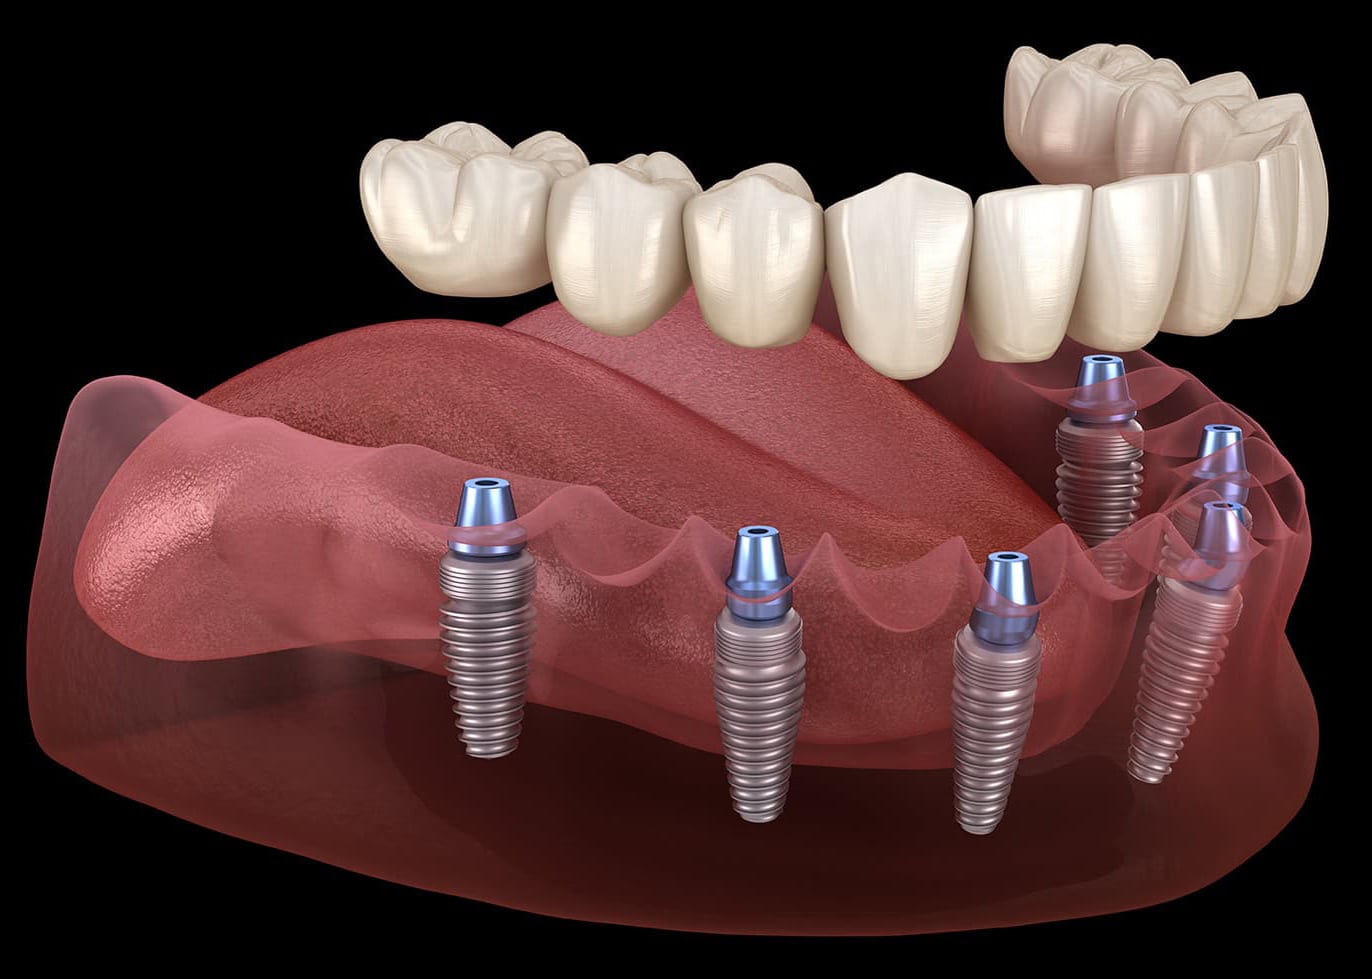 Same day temporary crown is placed over the embedded immediate load implants